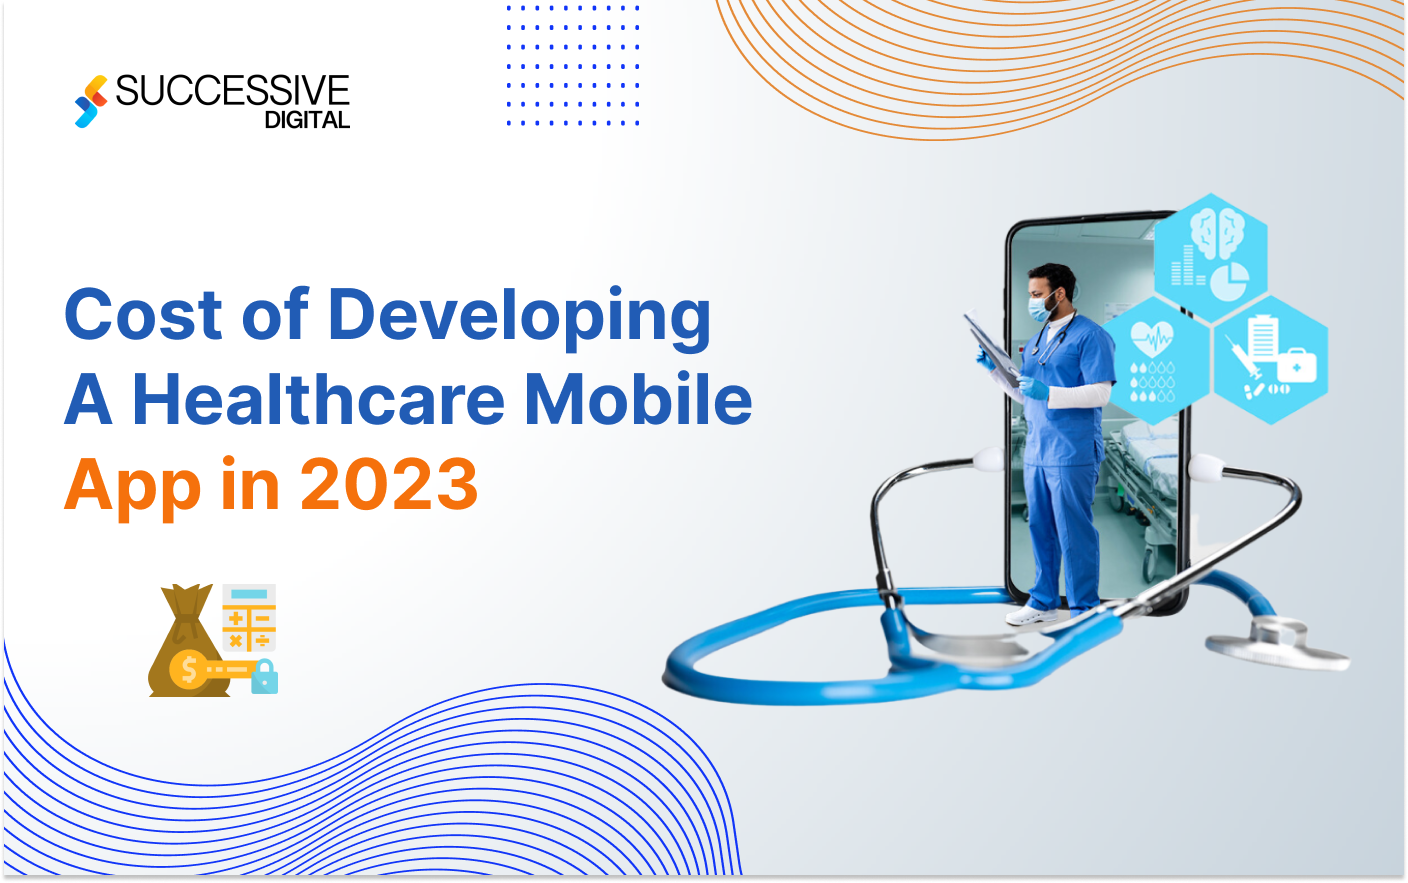 How Much Does Healthcare App Development Cost In 2023?